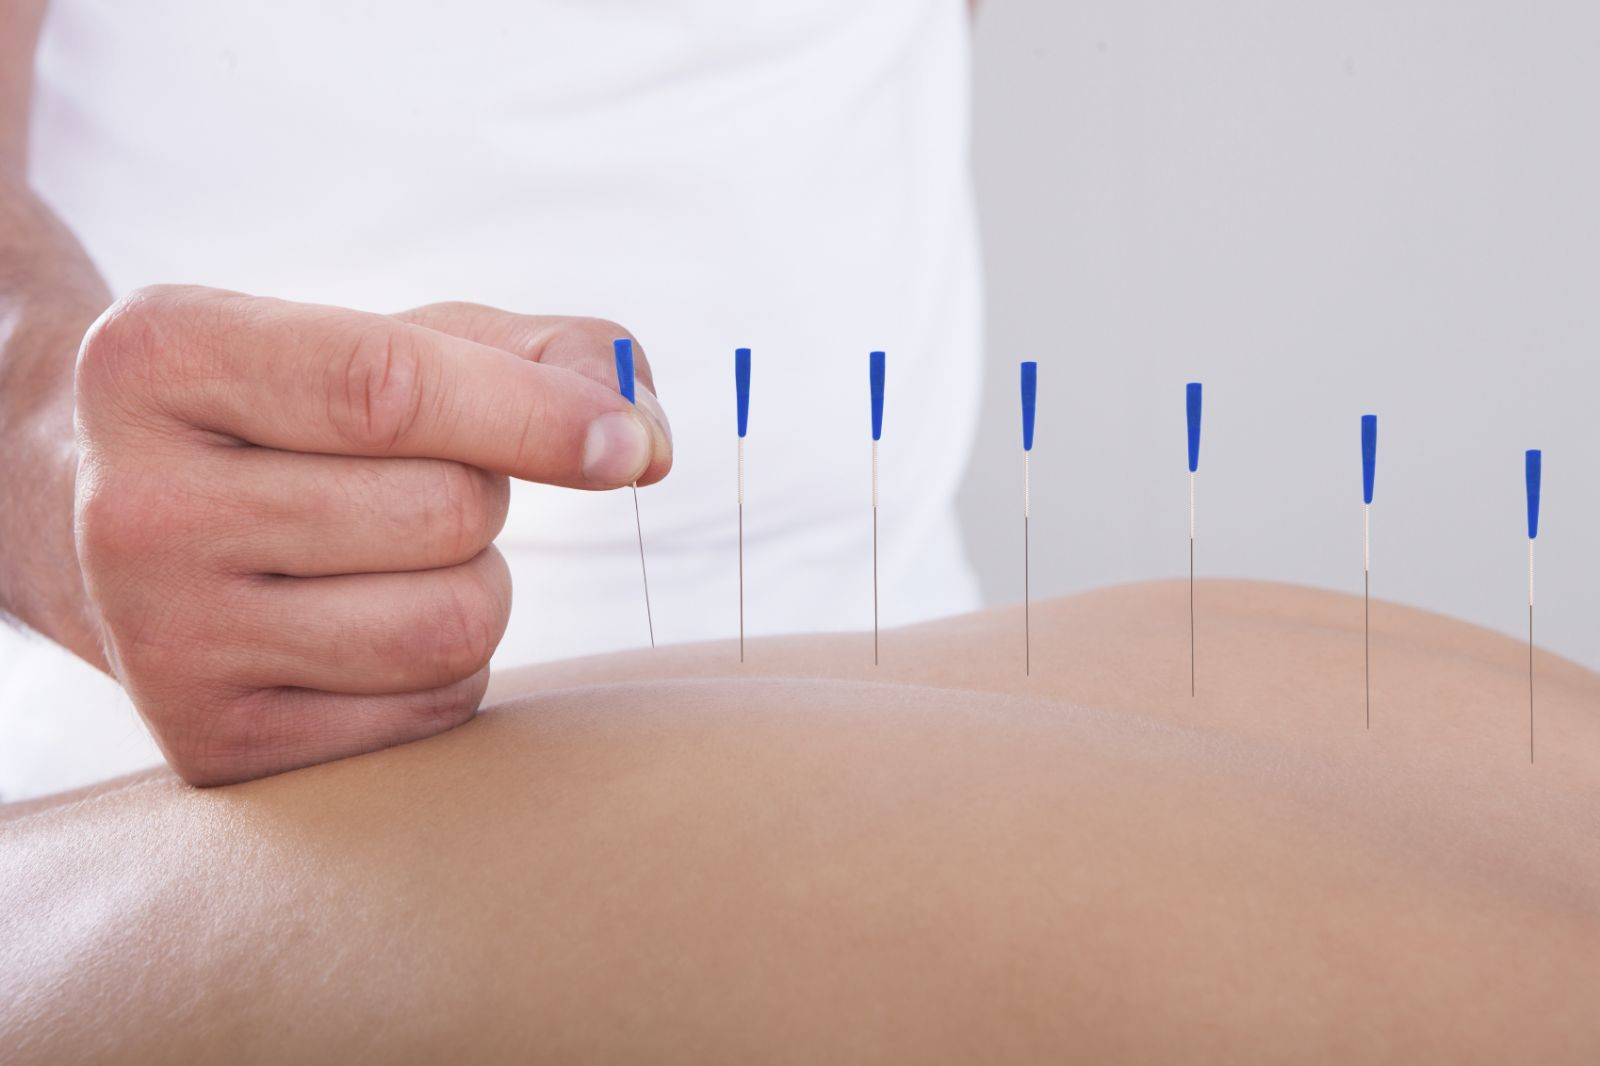 is acupuncture good for pain relief?